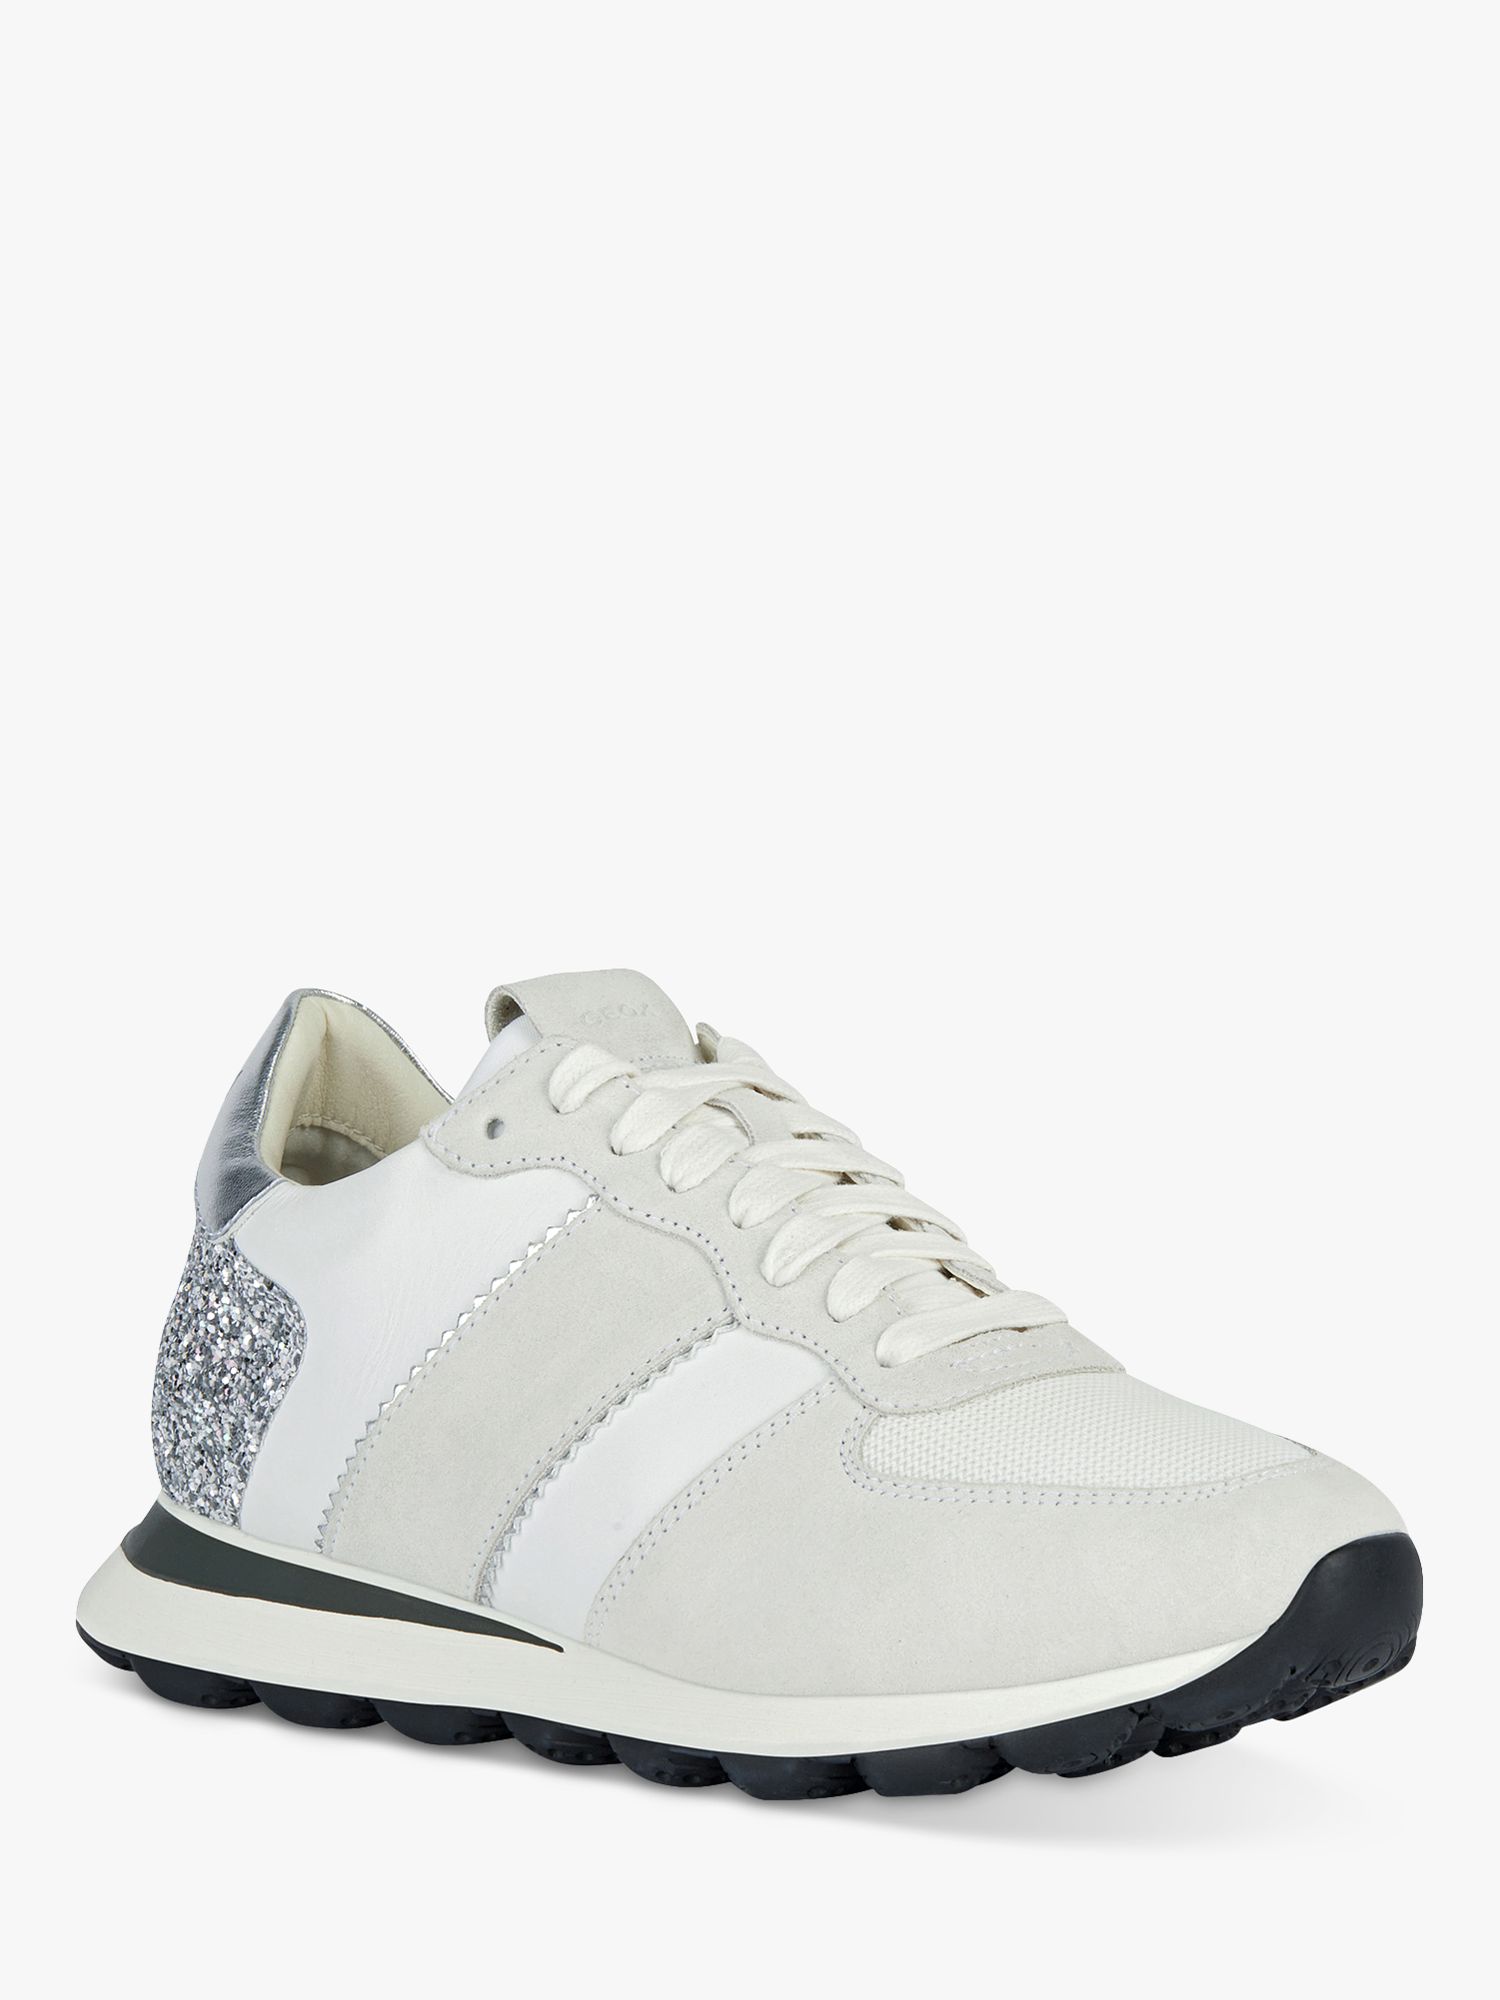 Geox Spherica Vseries Leather Mix Trainers, White/Off White at John ...